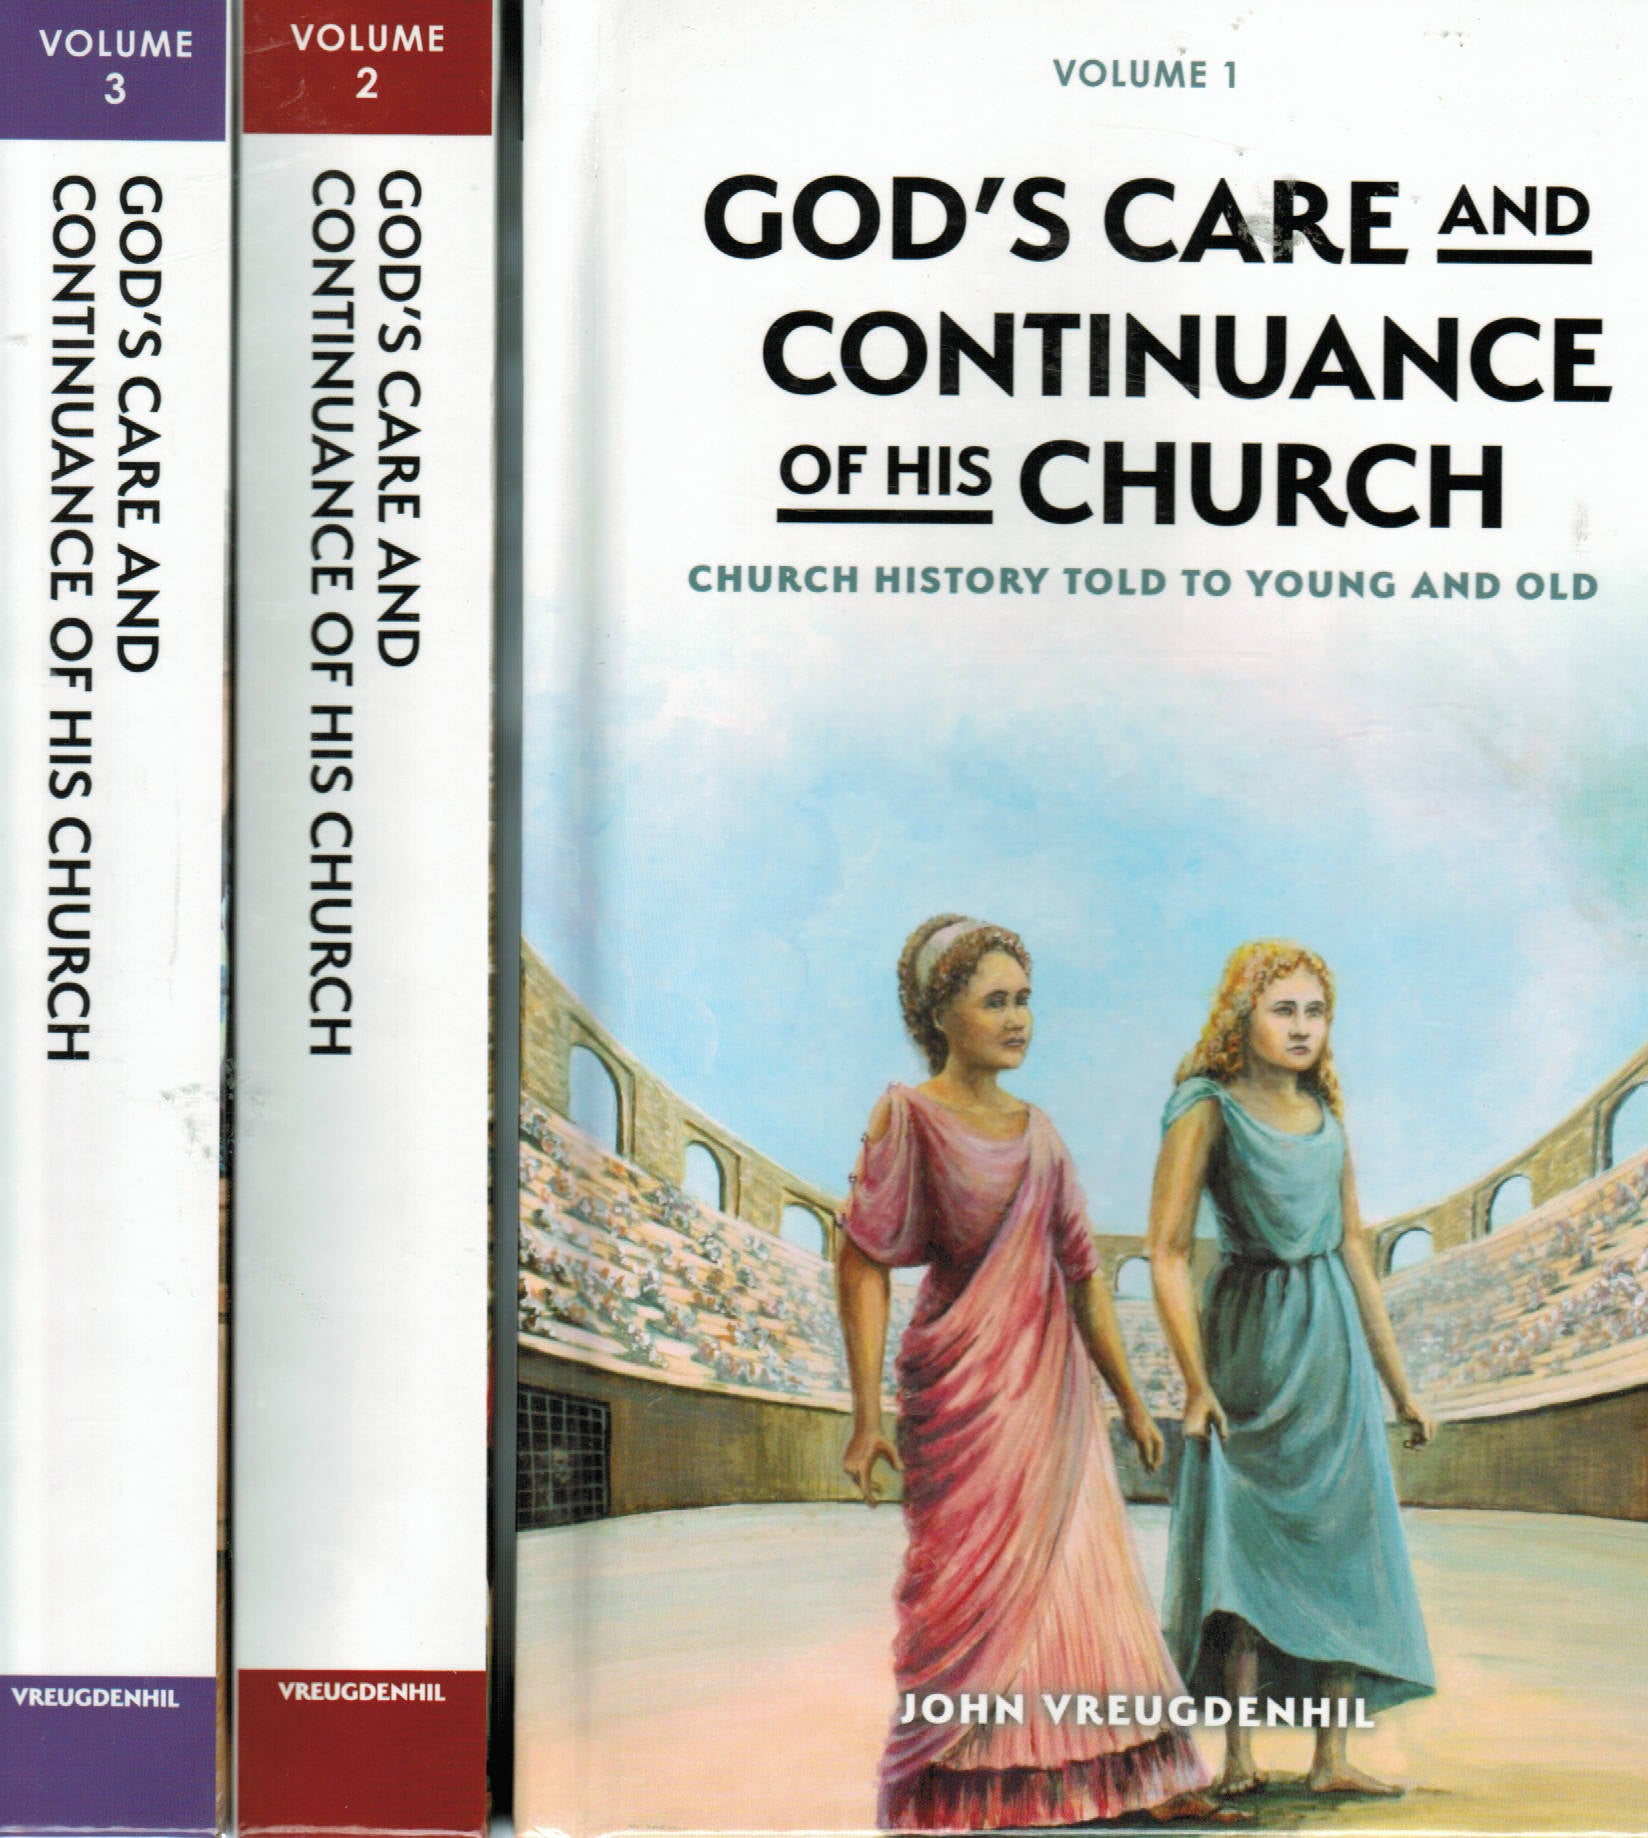 God's Care and Continuance of His Church: 3 Volume Set